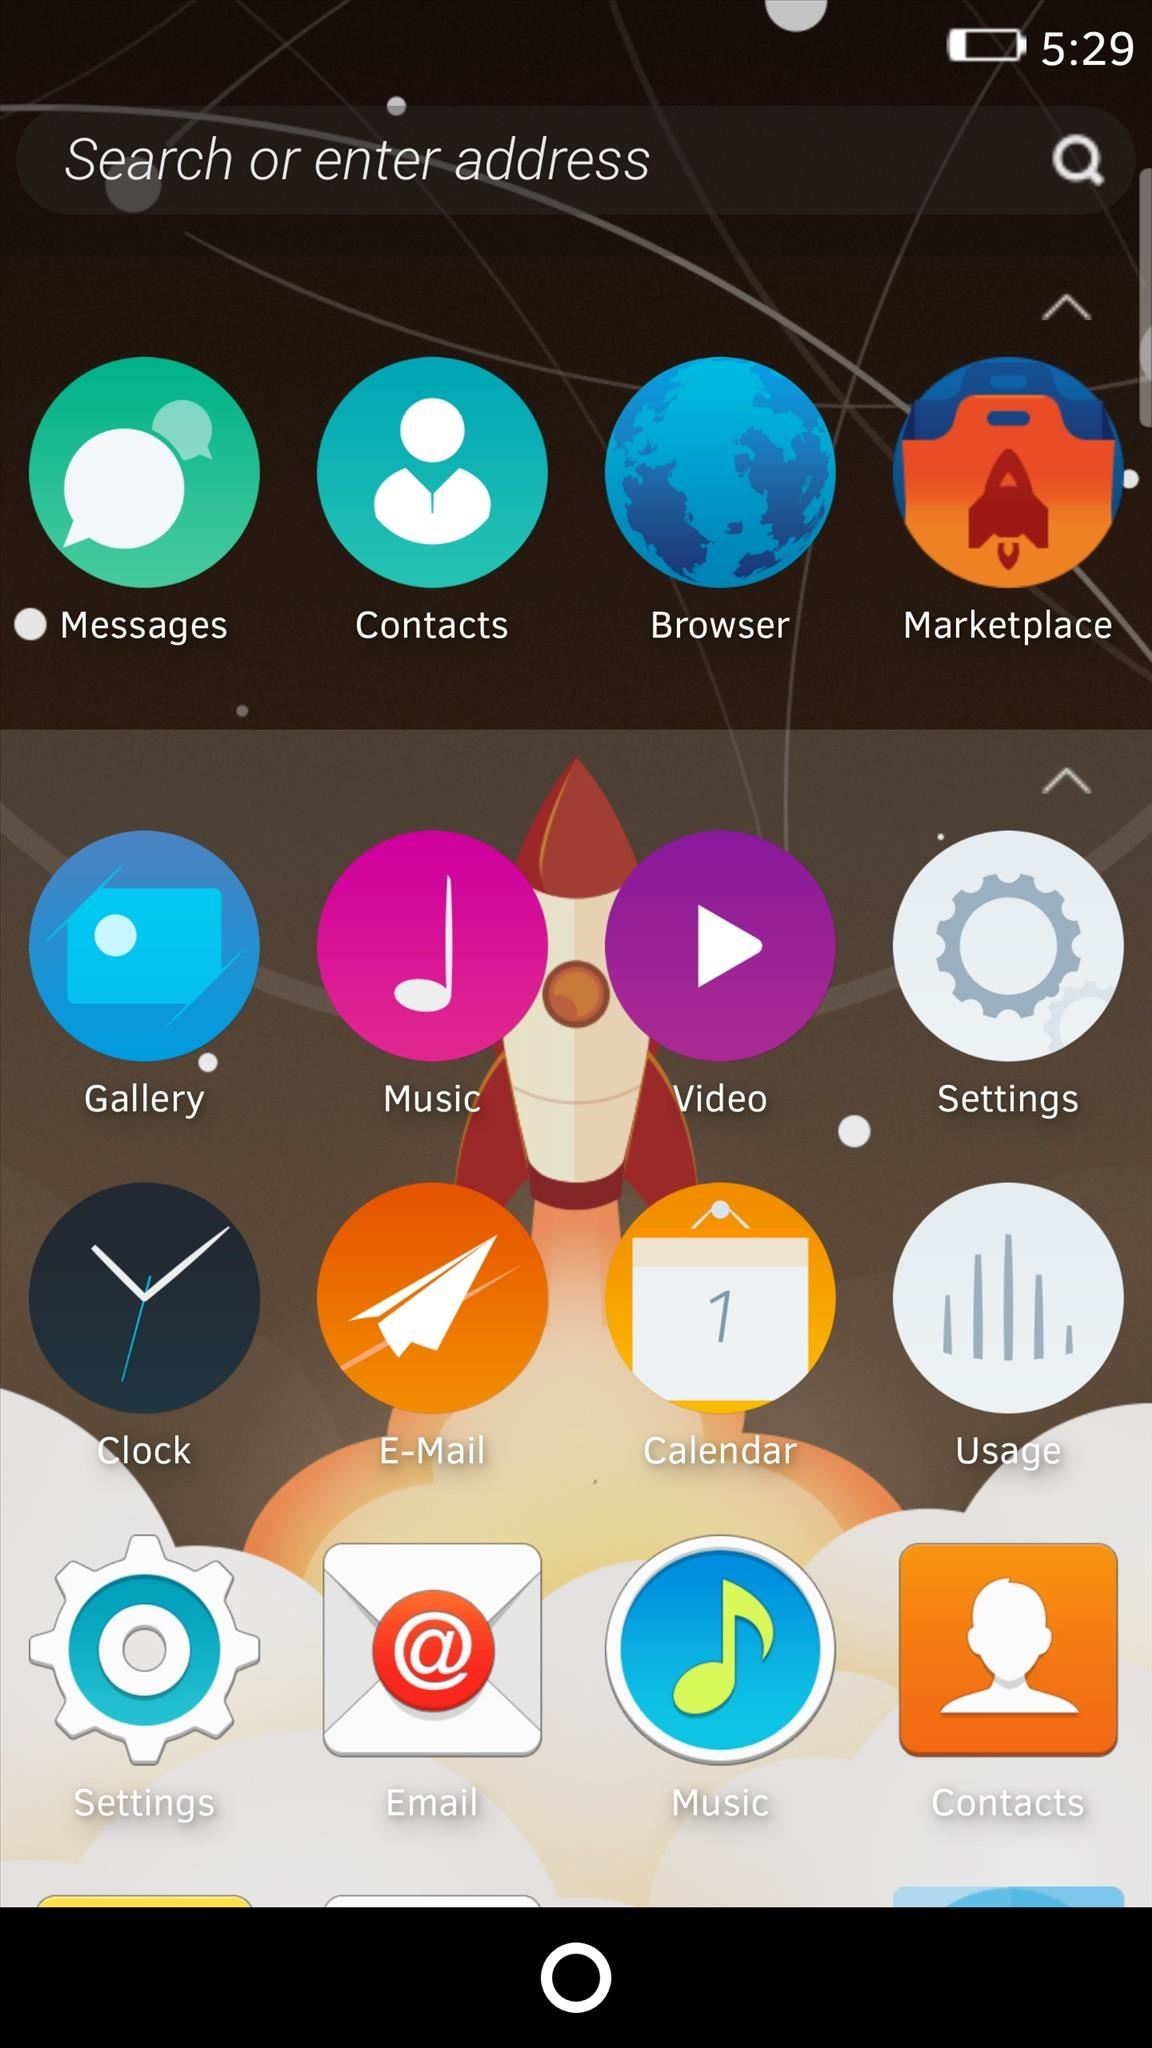 How to Install Firefox OS on Android Without Any Rooting or ROMs